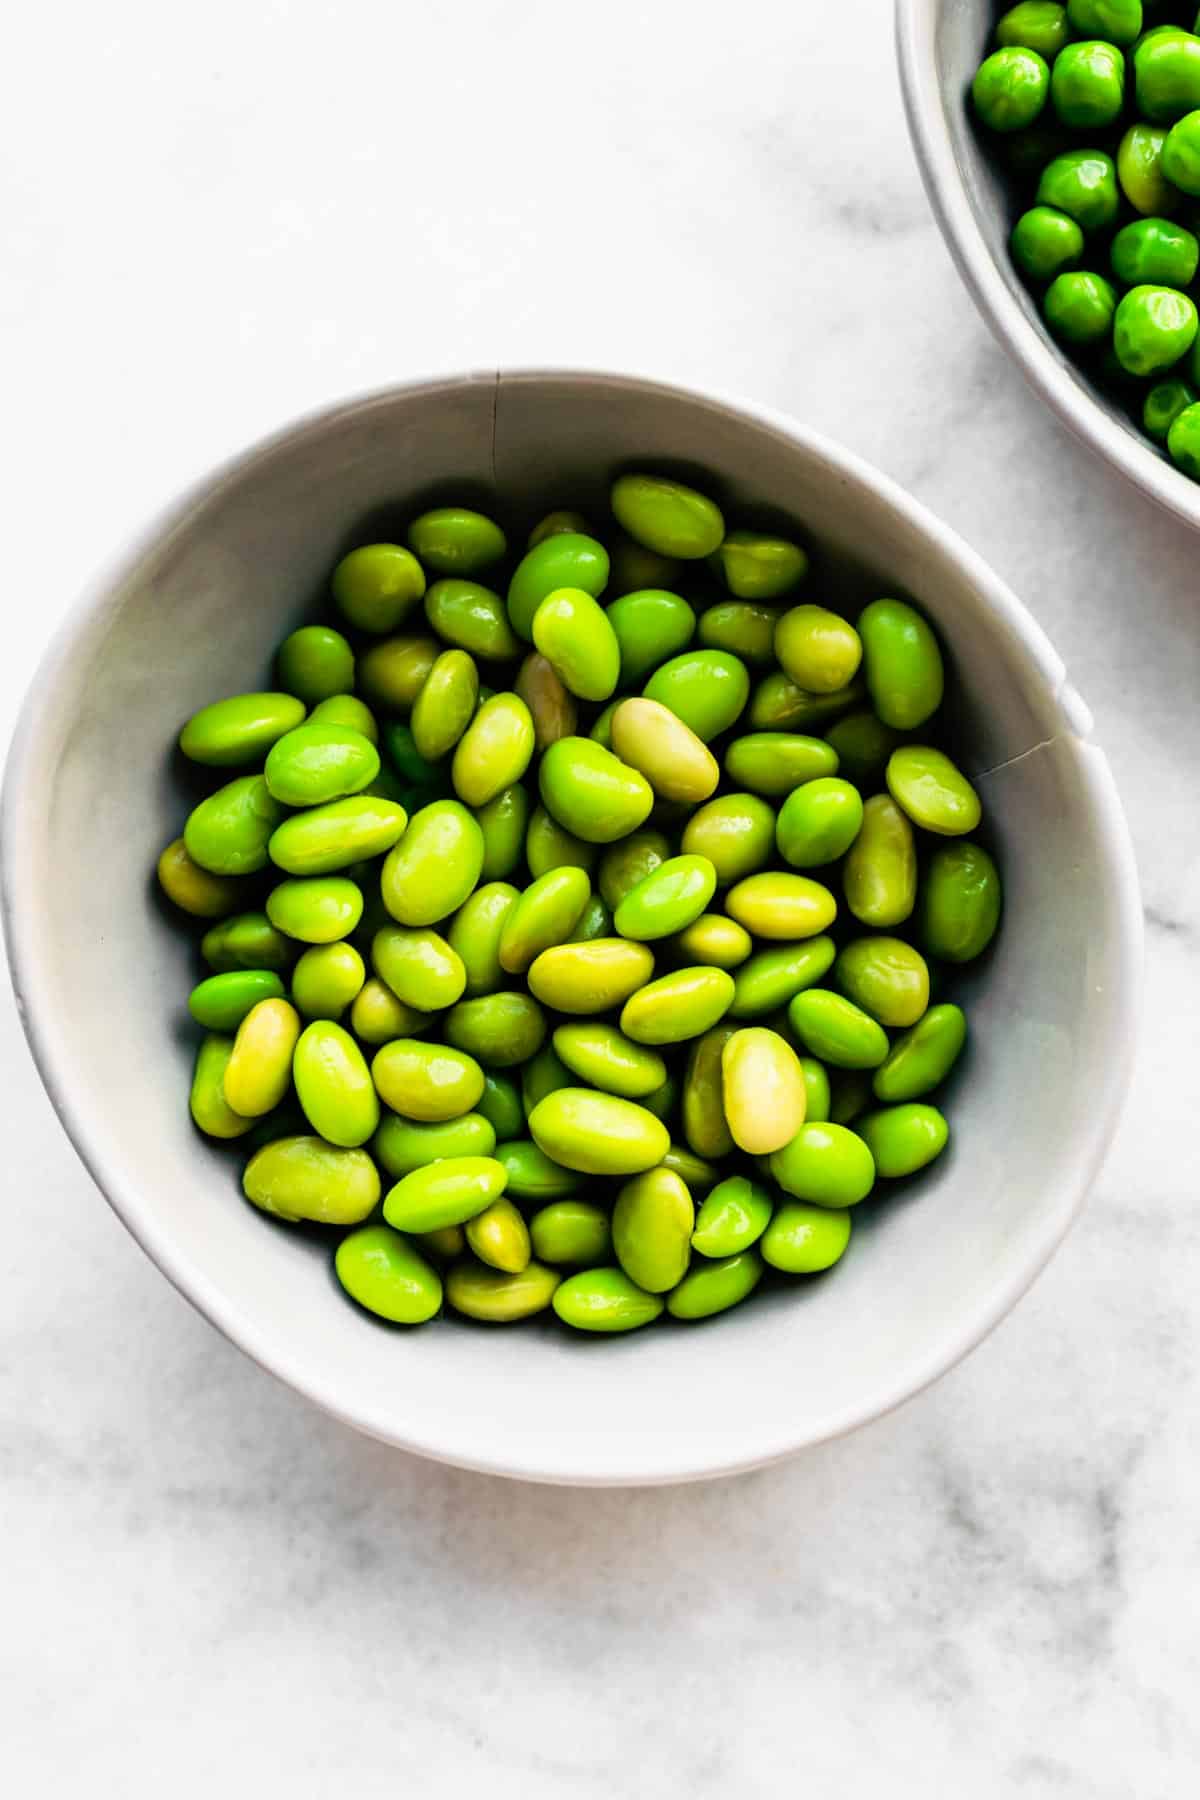 Overhead shot of green soybeans in a bowl on a counter top.